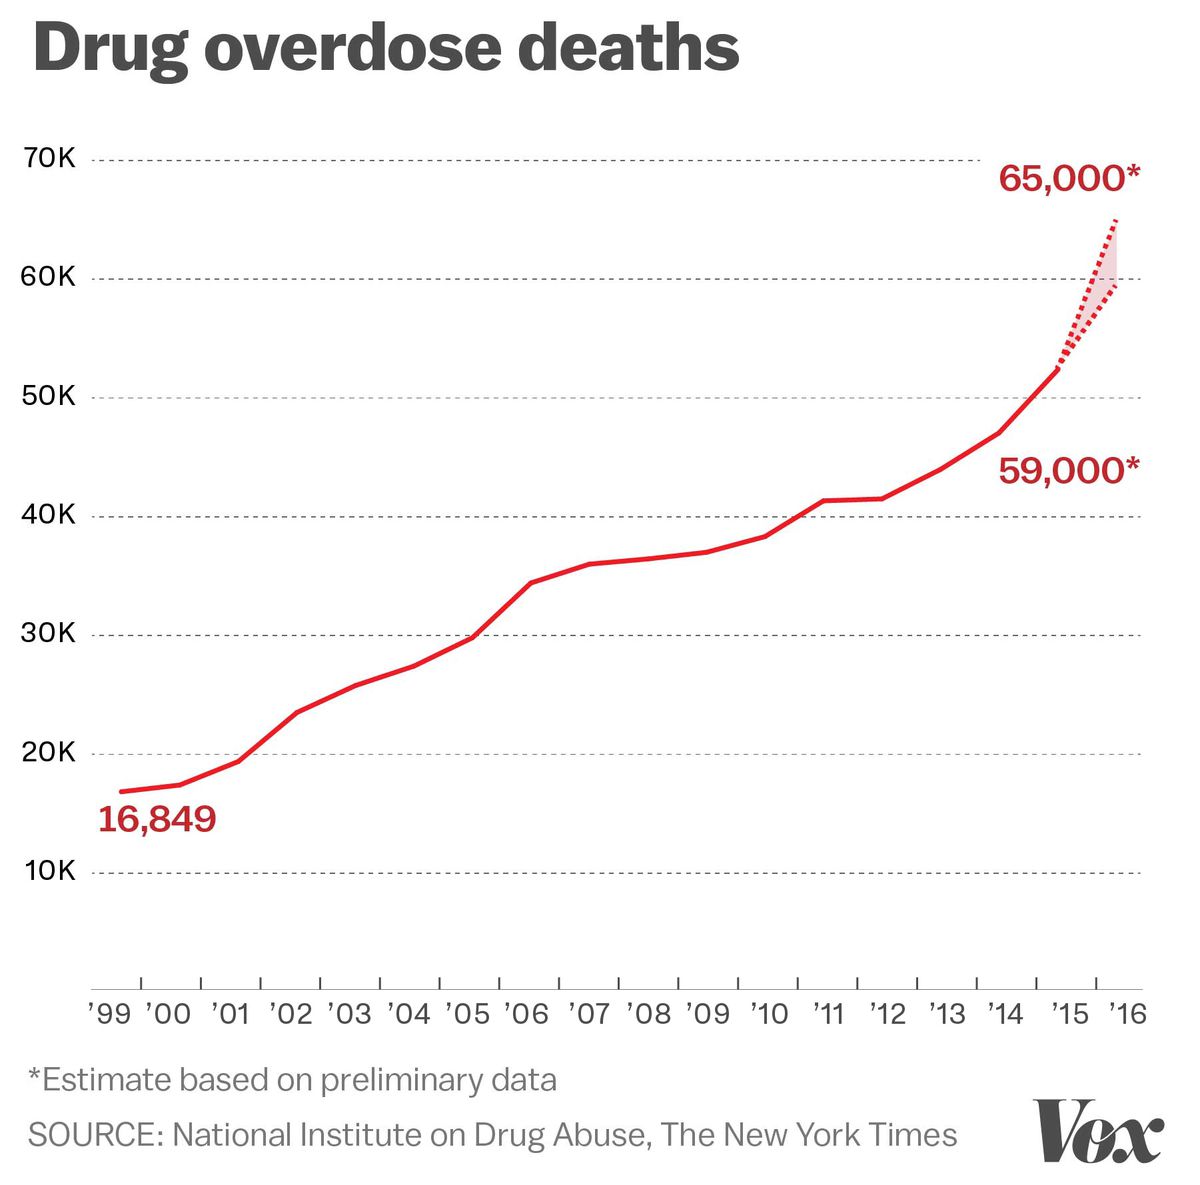 A chart of US drug overdoses going back to 1999.